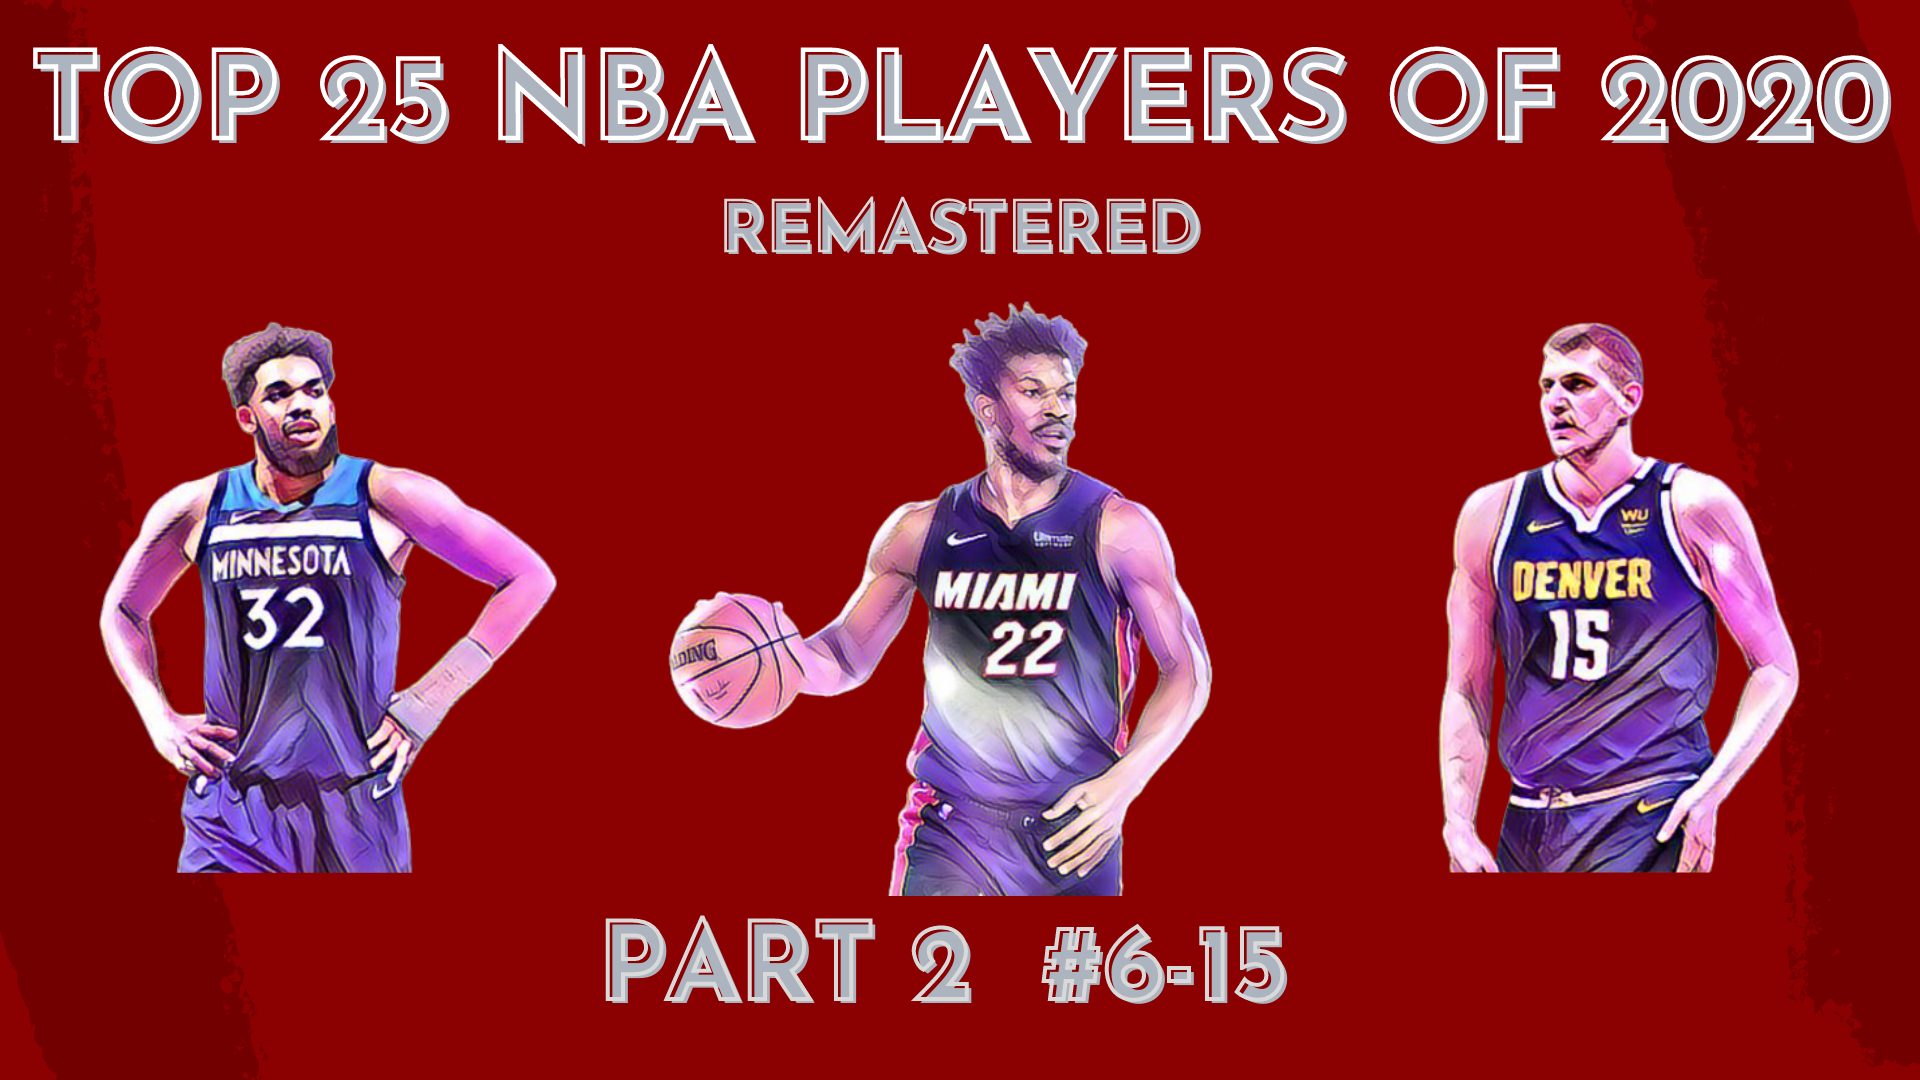 The Top 25 NBA Players of 2020 – A Remastered List (Part 2 #6-15)